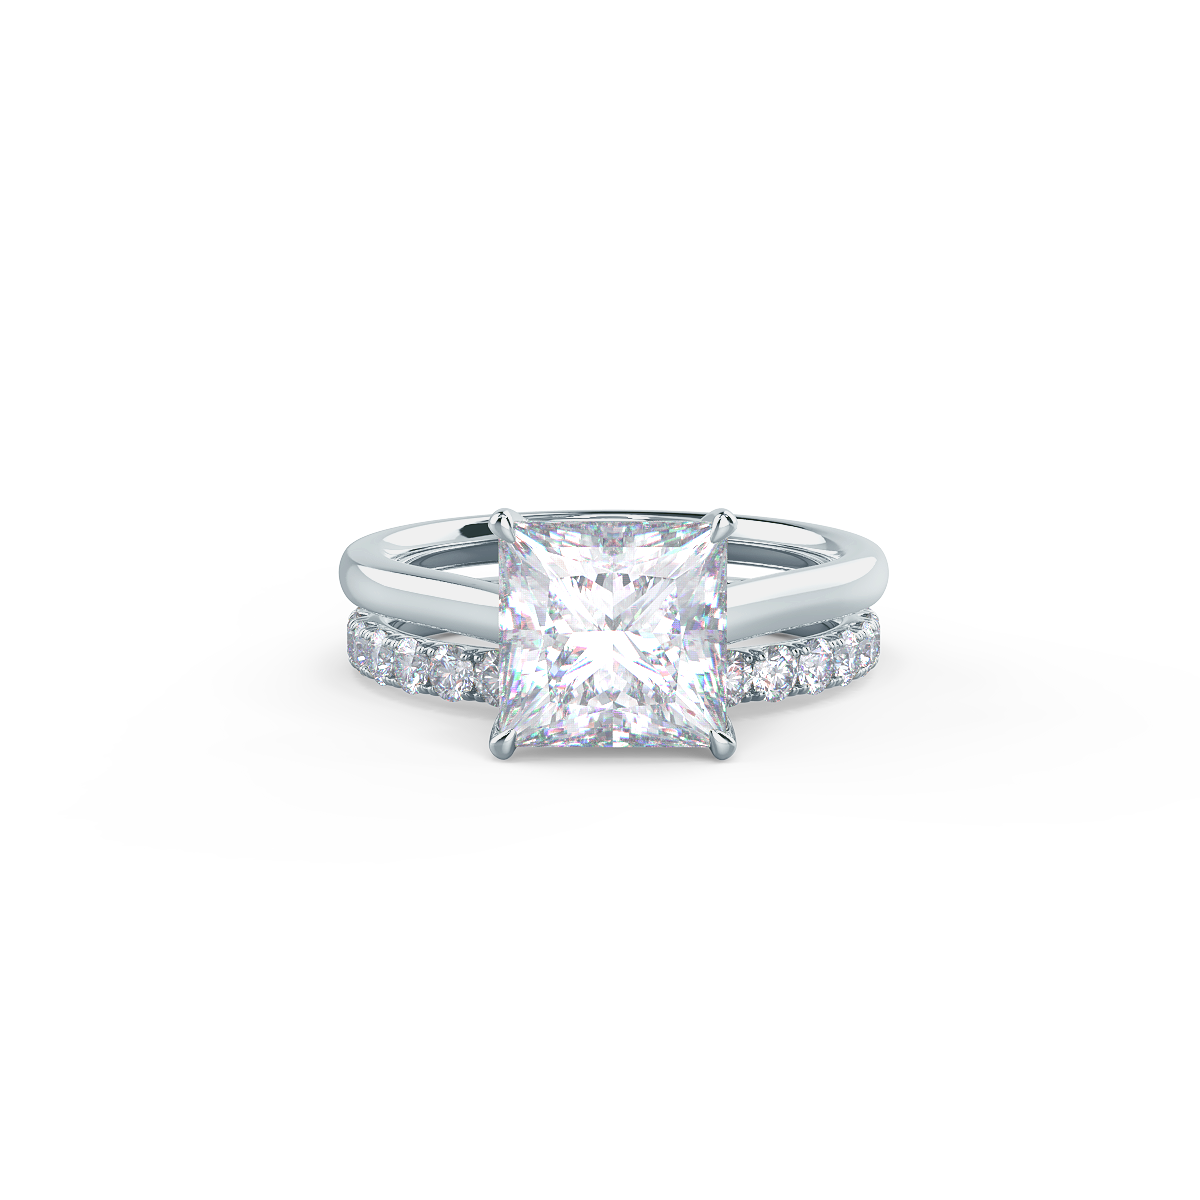  This setting allows a wedding band to sit flush with no gap.     Shop All Wedding Bands   